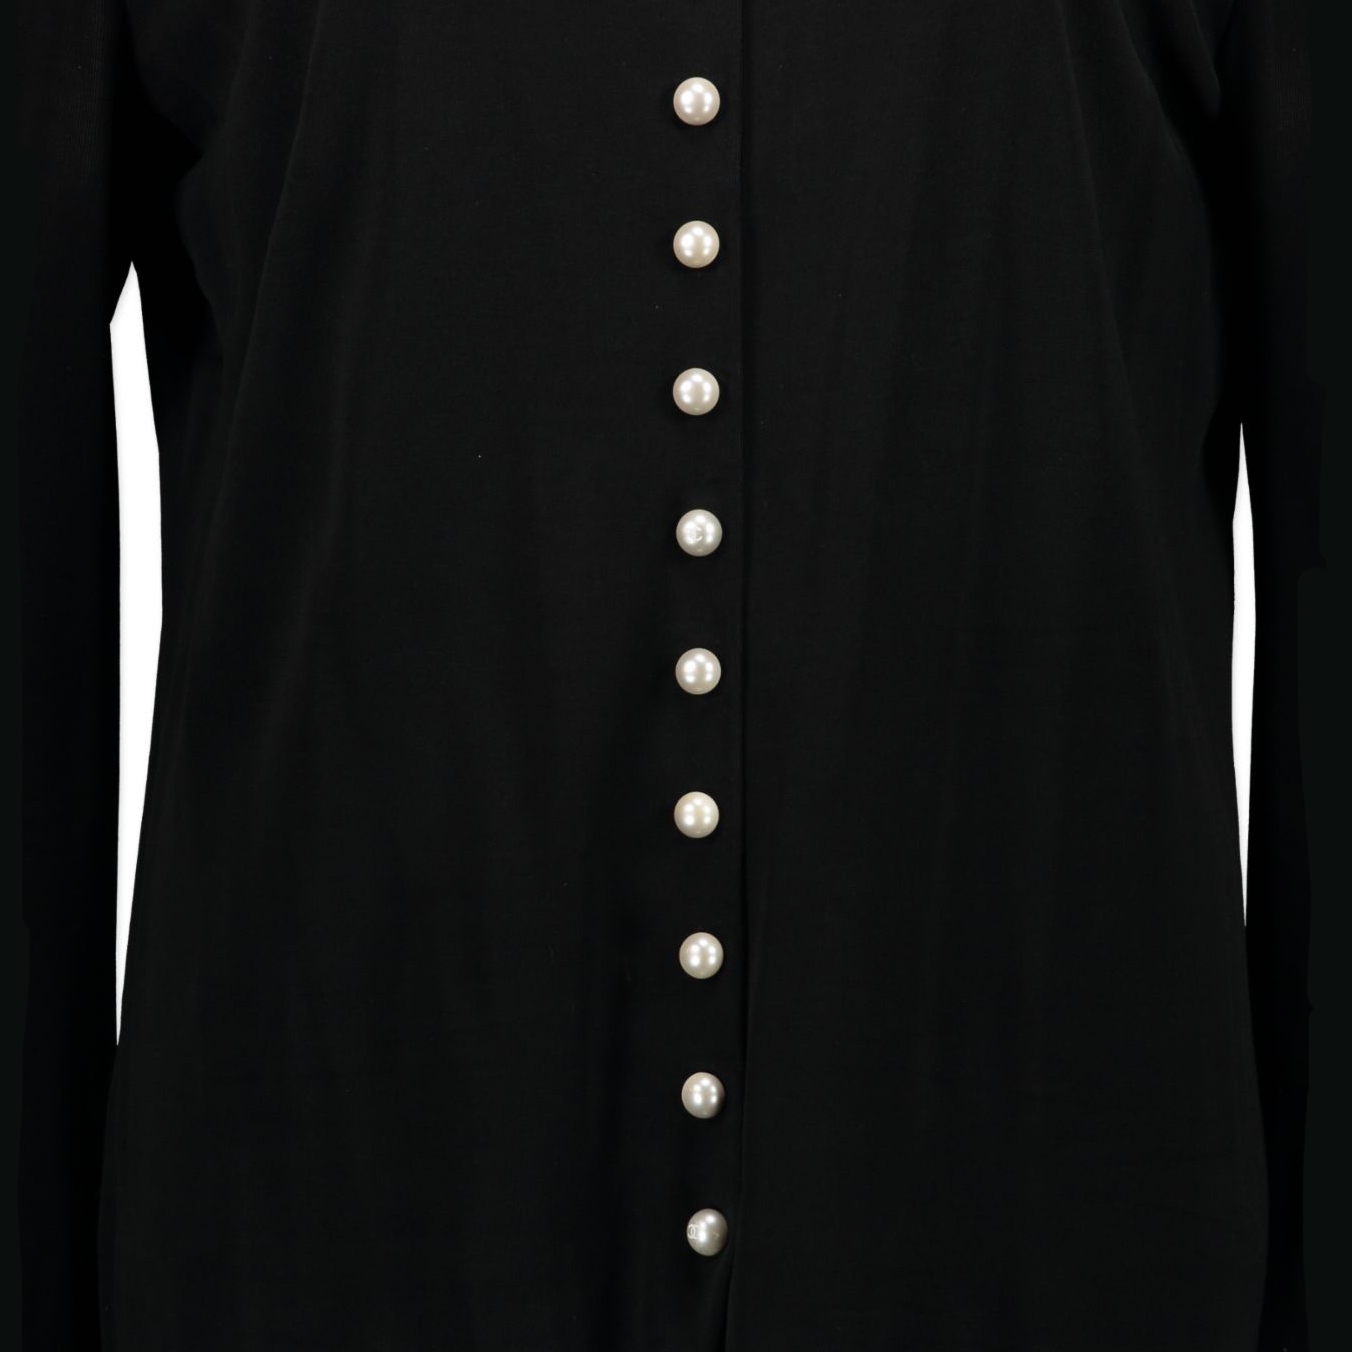 Chanel Black Long Sleeve Blouse Pearl Embellished Button Detail